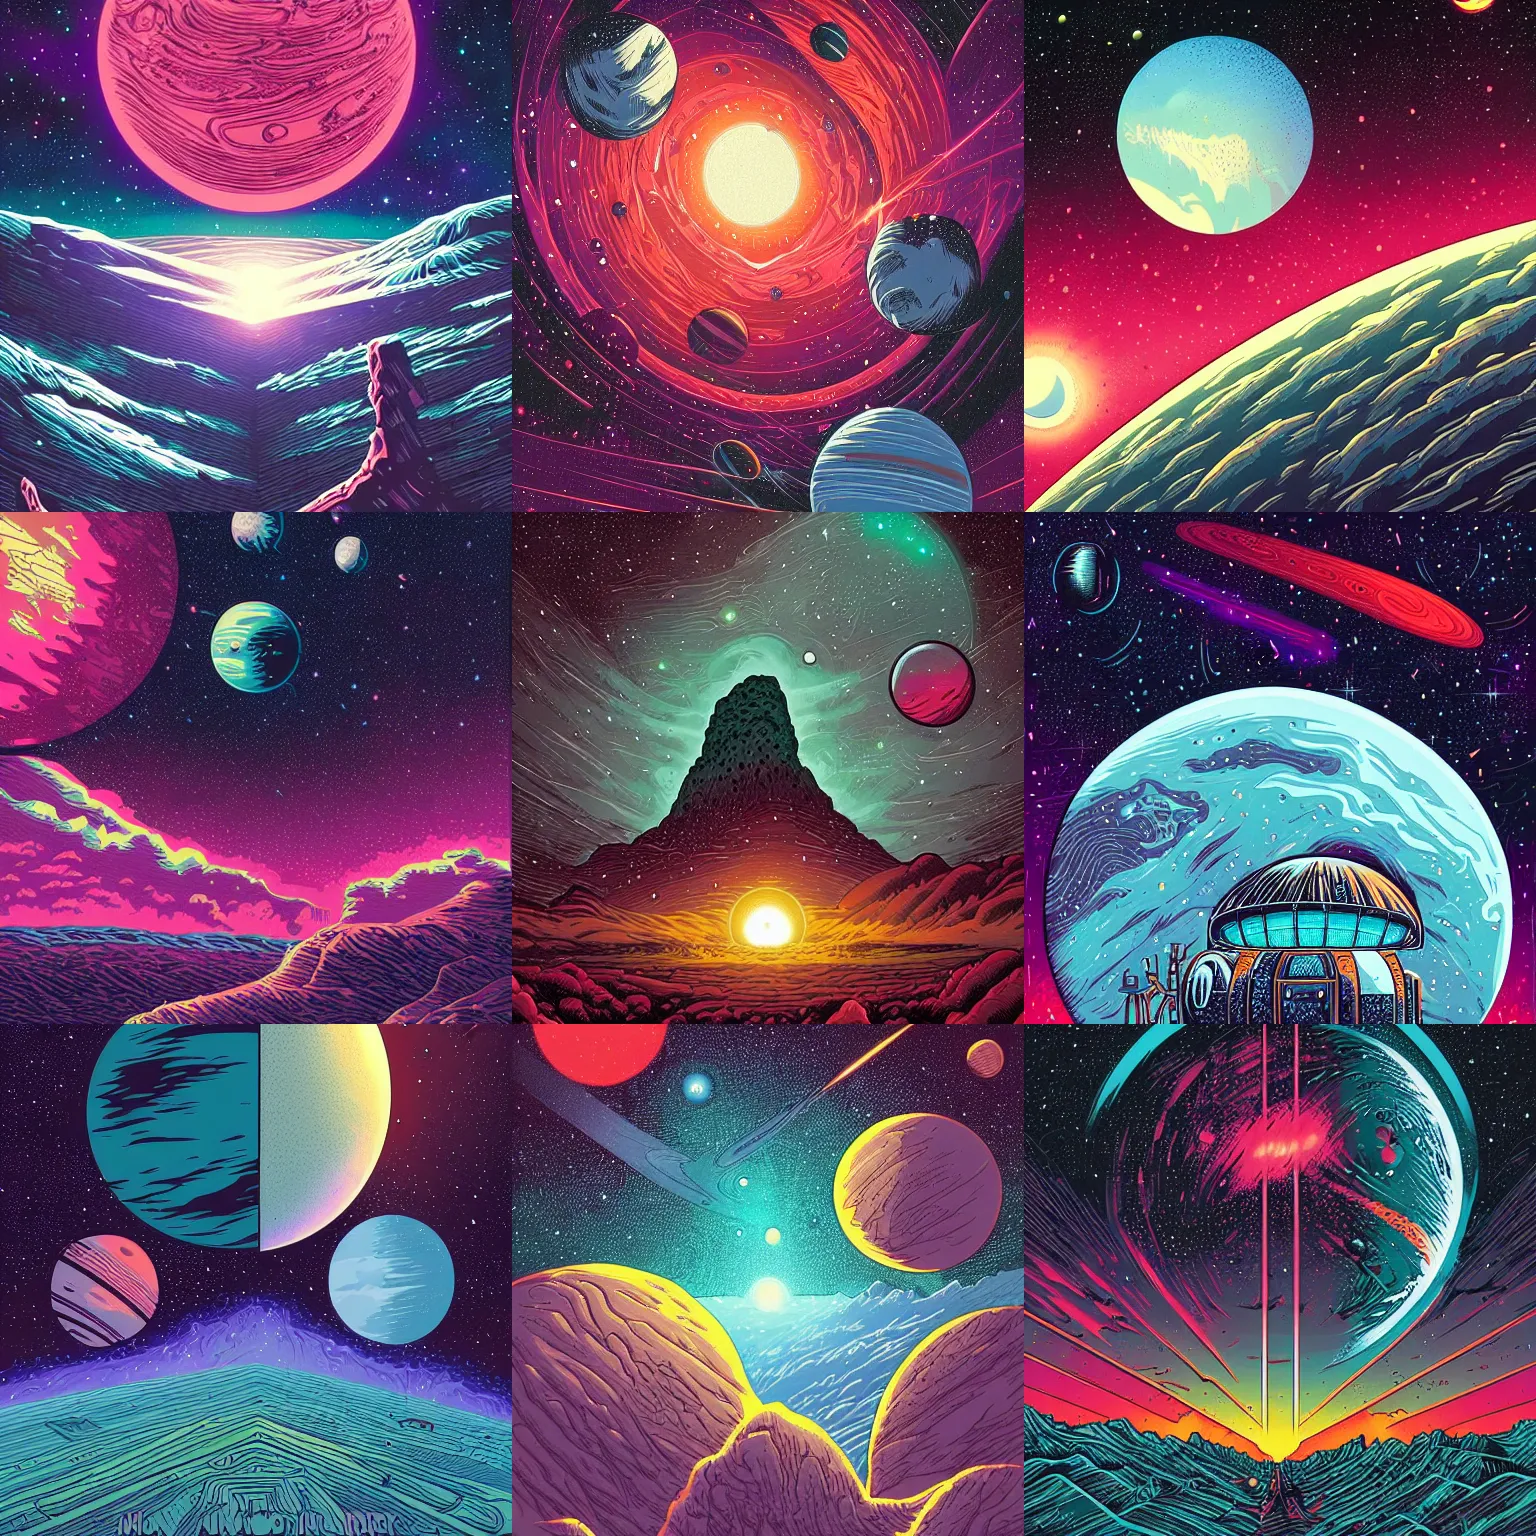 Prompt: another planet and nebula by Dan Mumford